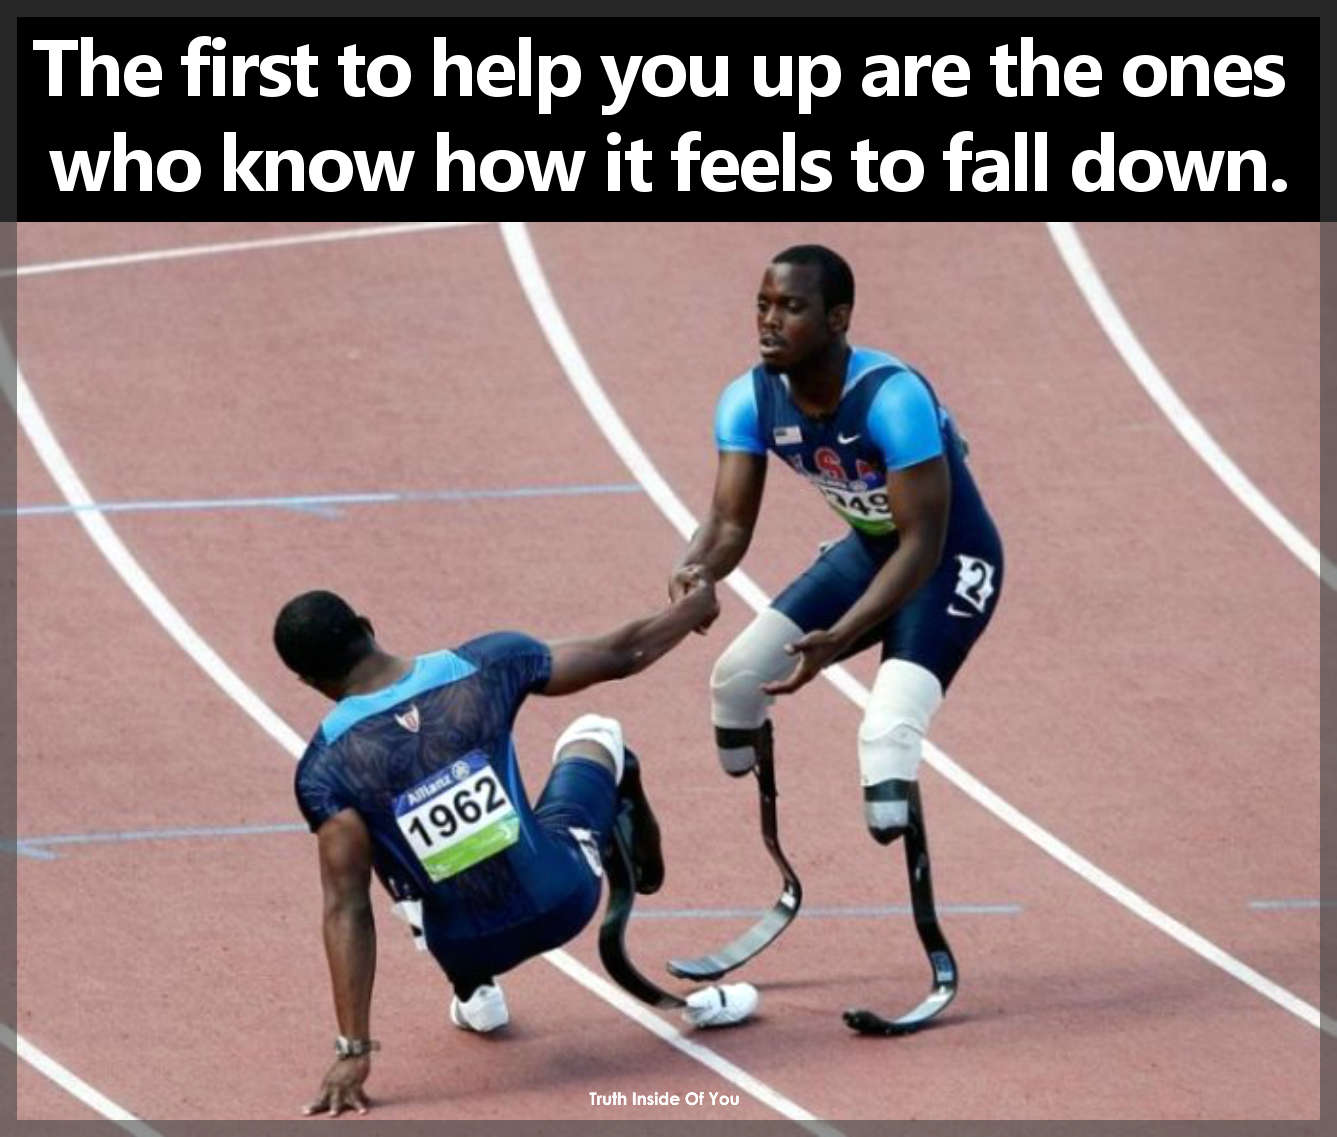 The first to help you up are the ones who know how it feels to fall down.